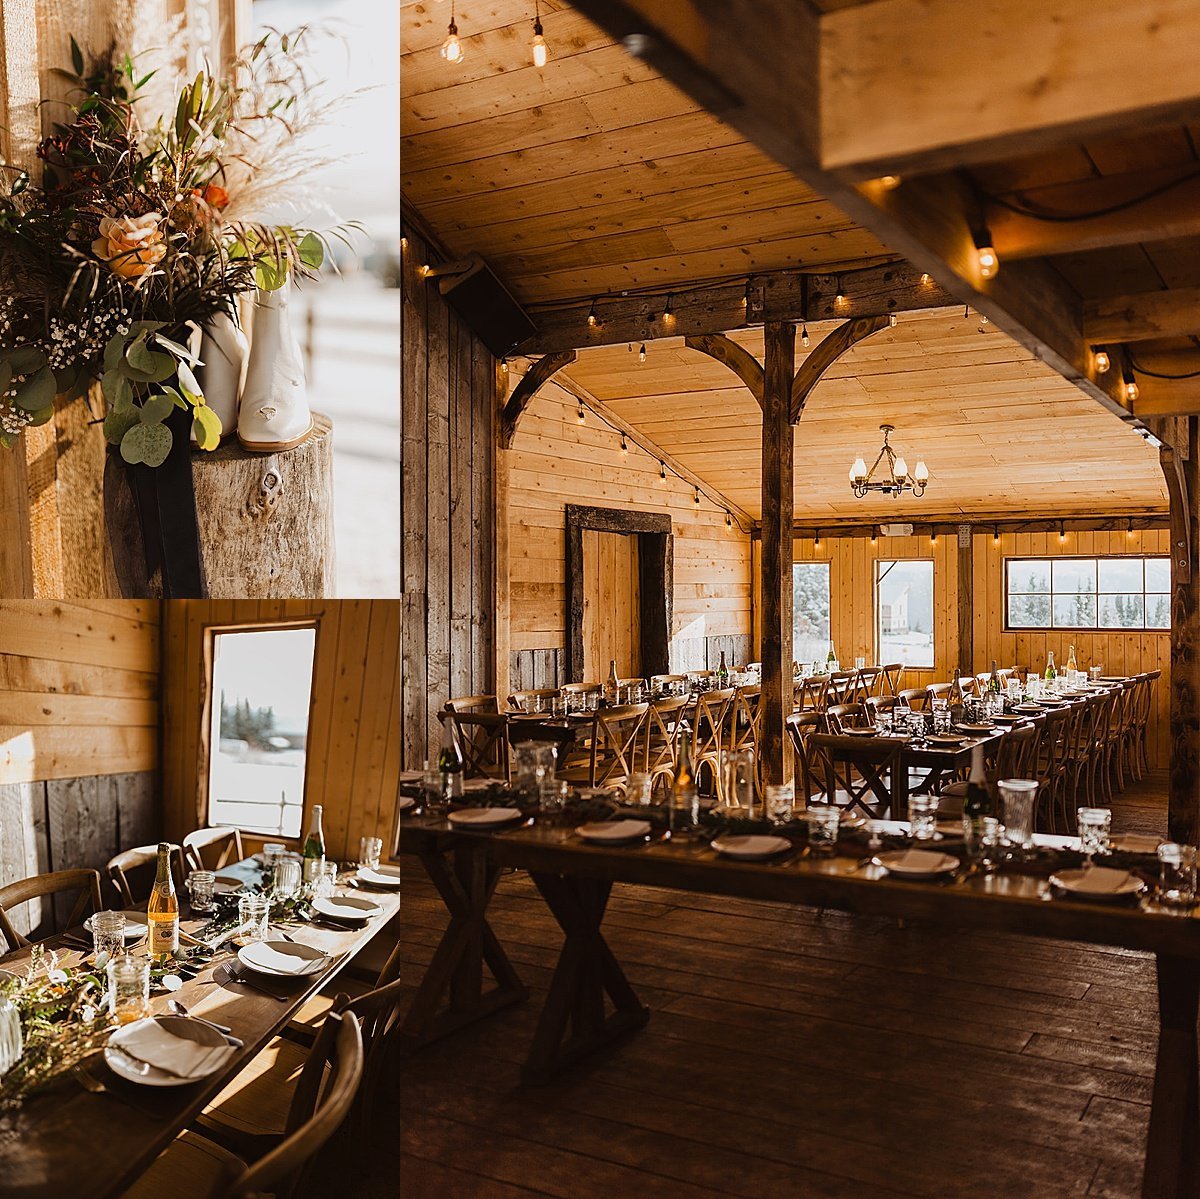  Cozy rustic venue details from fall wedding in alaska shot by Theresa McDonald Photography 